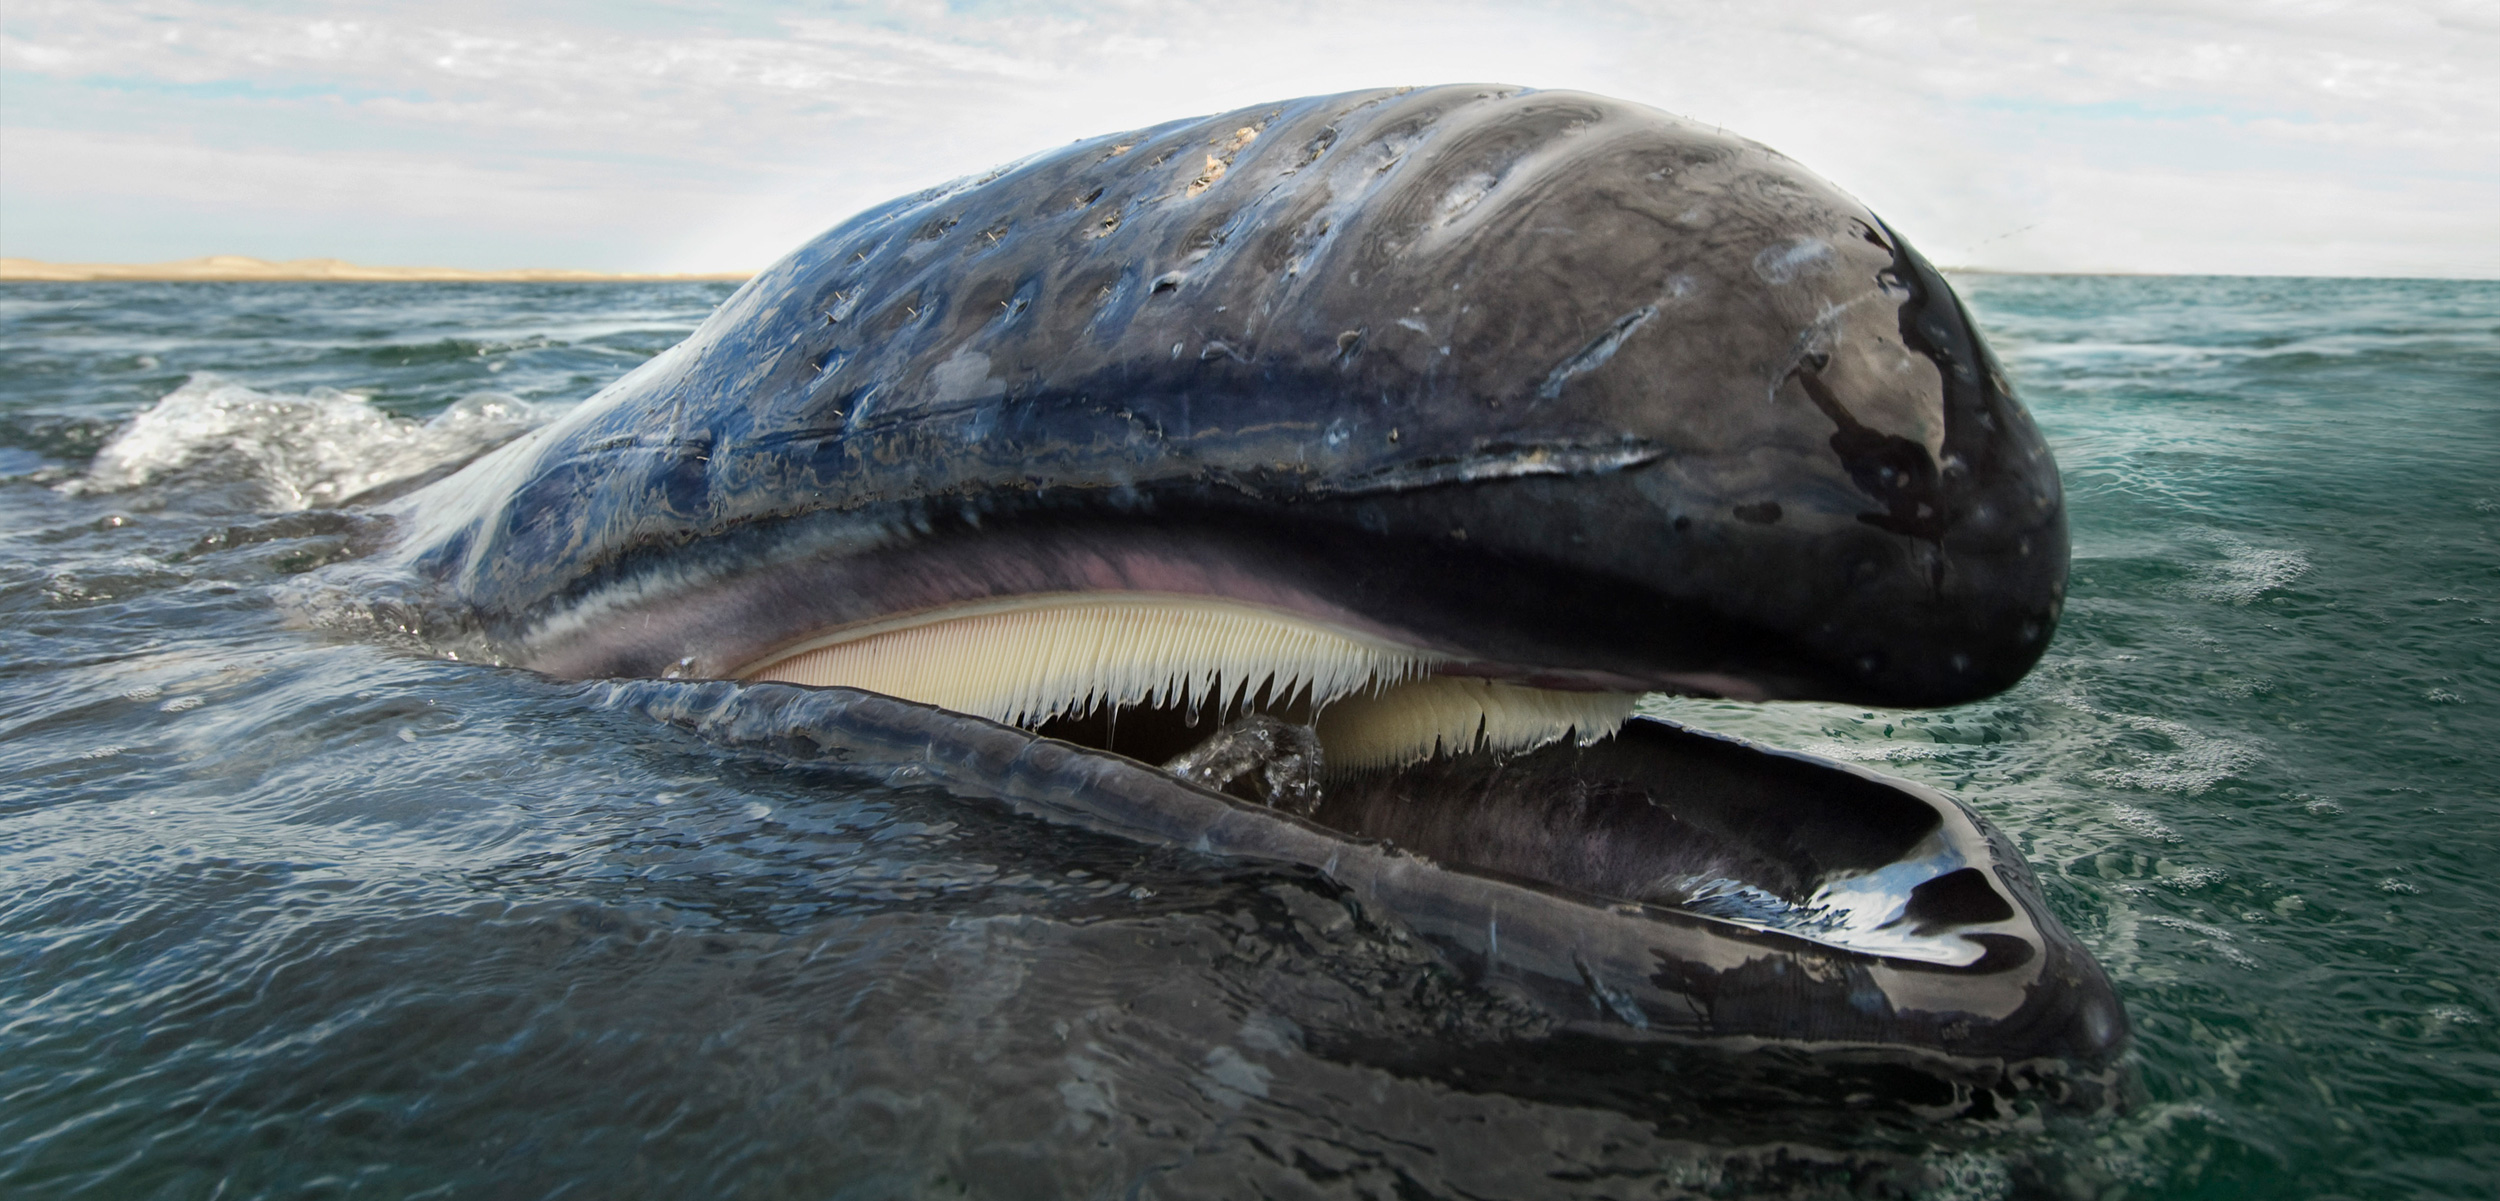 Gray whales use about 300 baleen plates attached to the roof of their mouth to strain food from water and sediment. Compared to other baleen whales, gray whale baleen is quite short, ranging from about five to 25 centimeters in length. Photo by Christopher Swann/Minden Pictures